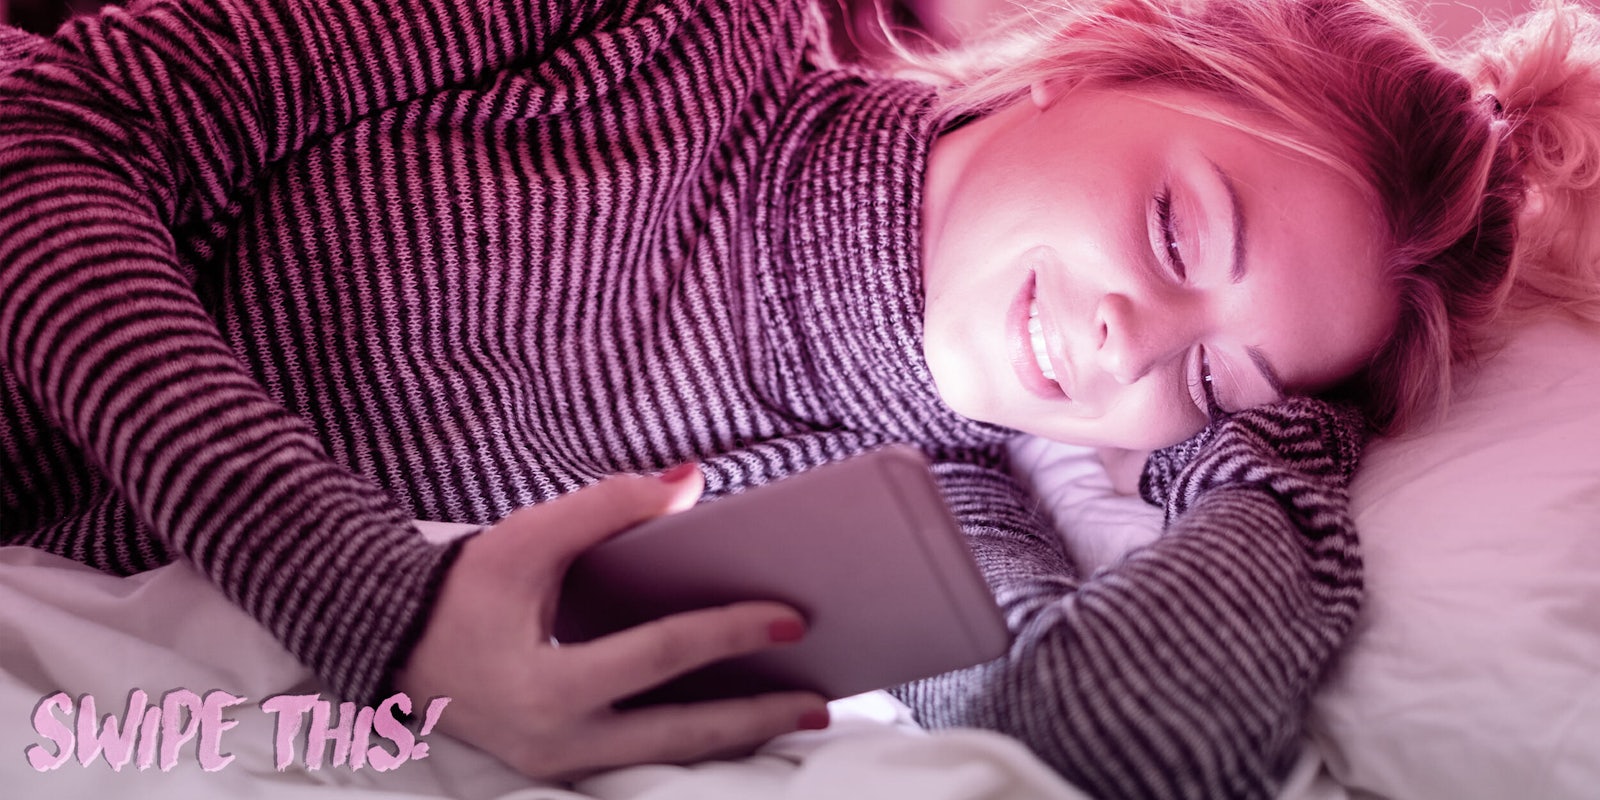 Woman looking at her phone in bed